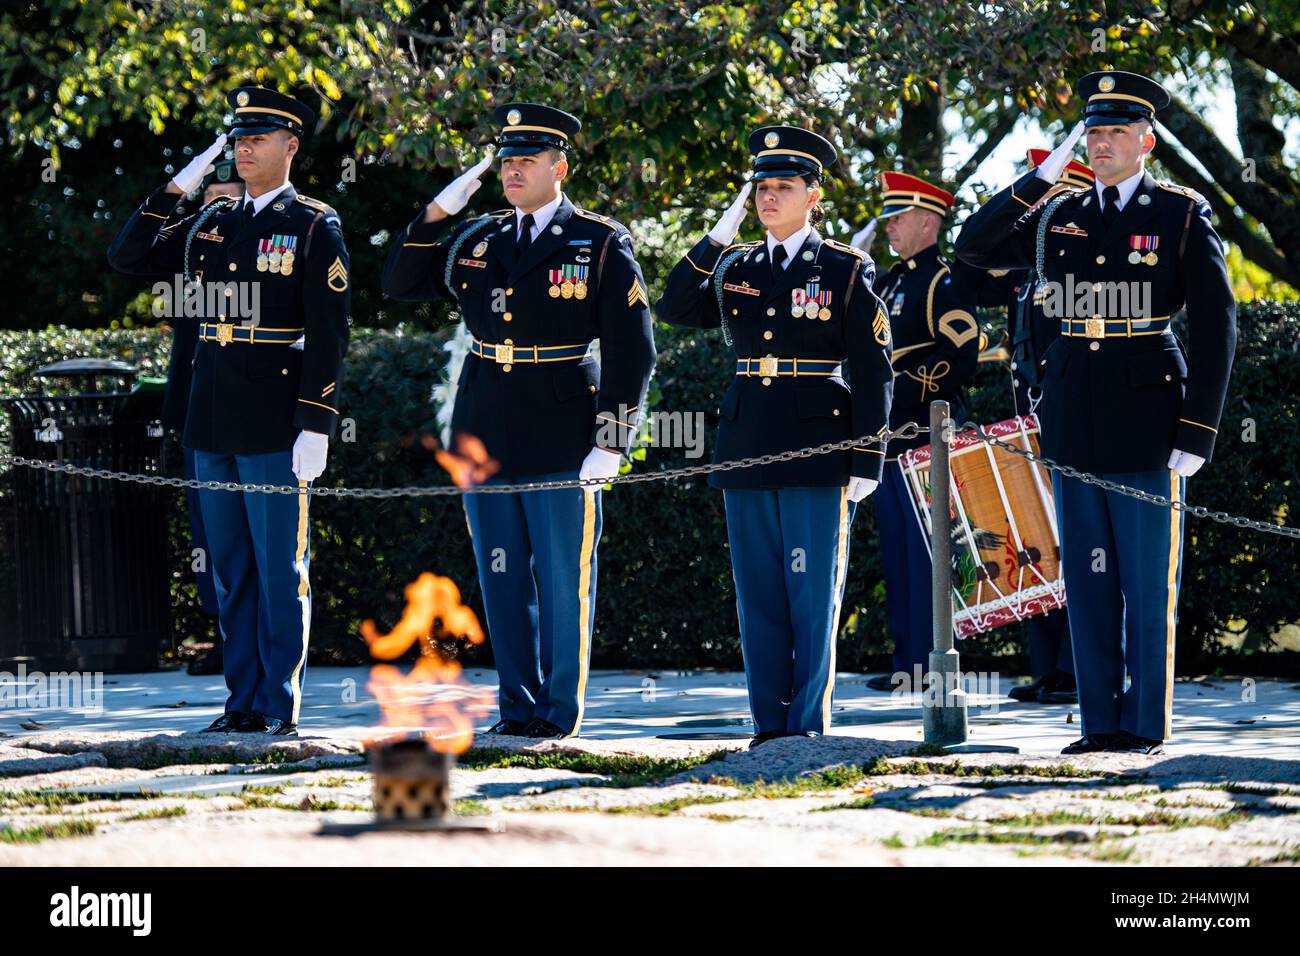 Arlington, United States Of America. 03rd Nov, 2021. Arlington, United States of America. 03 November, 2021. Members of the 1st Special Forces Airborne Command, known as the Green Berets, hold a wreath-laying ceremony at the gravesite of President John F. Kennedy at Arlington National Cemetery November 3, 2021 in Arlington, Virginia. The ceremony commemorates Kennedy's contributions to the U.S. Army Special Forces. Credit: Elizabeth Fraser/U.S. Army/Alamy Live News Stock Photo